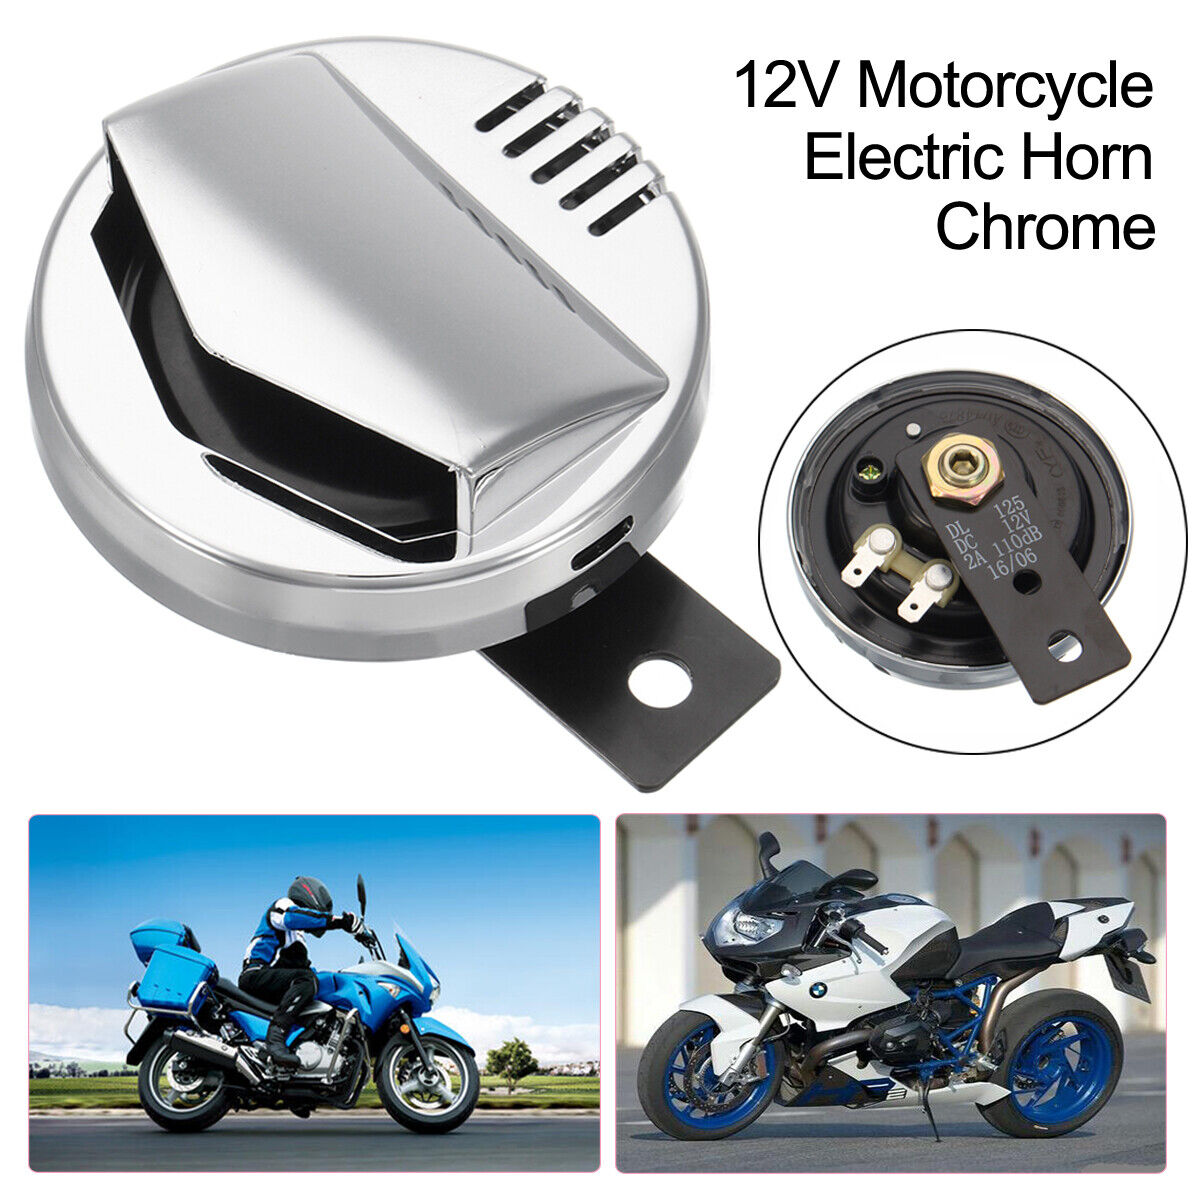 12V Super Loud 110db  Motorcycle Electric Horn Chrome Motorcycle Universal